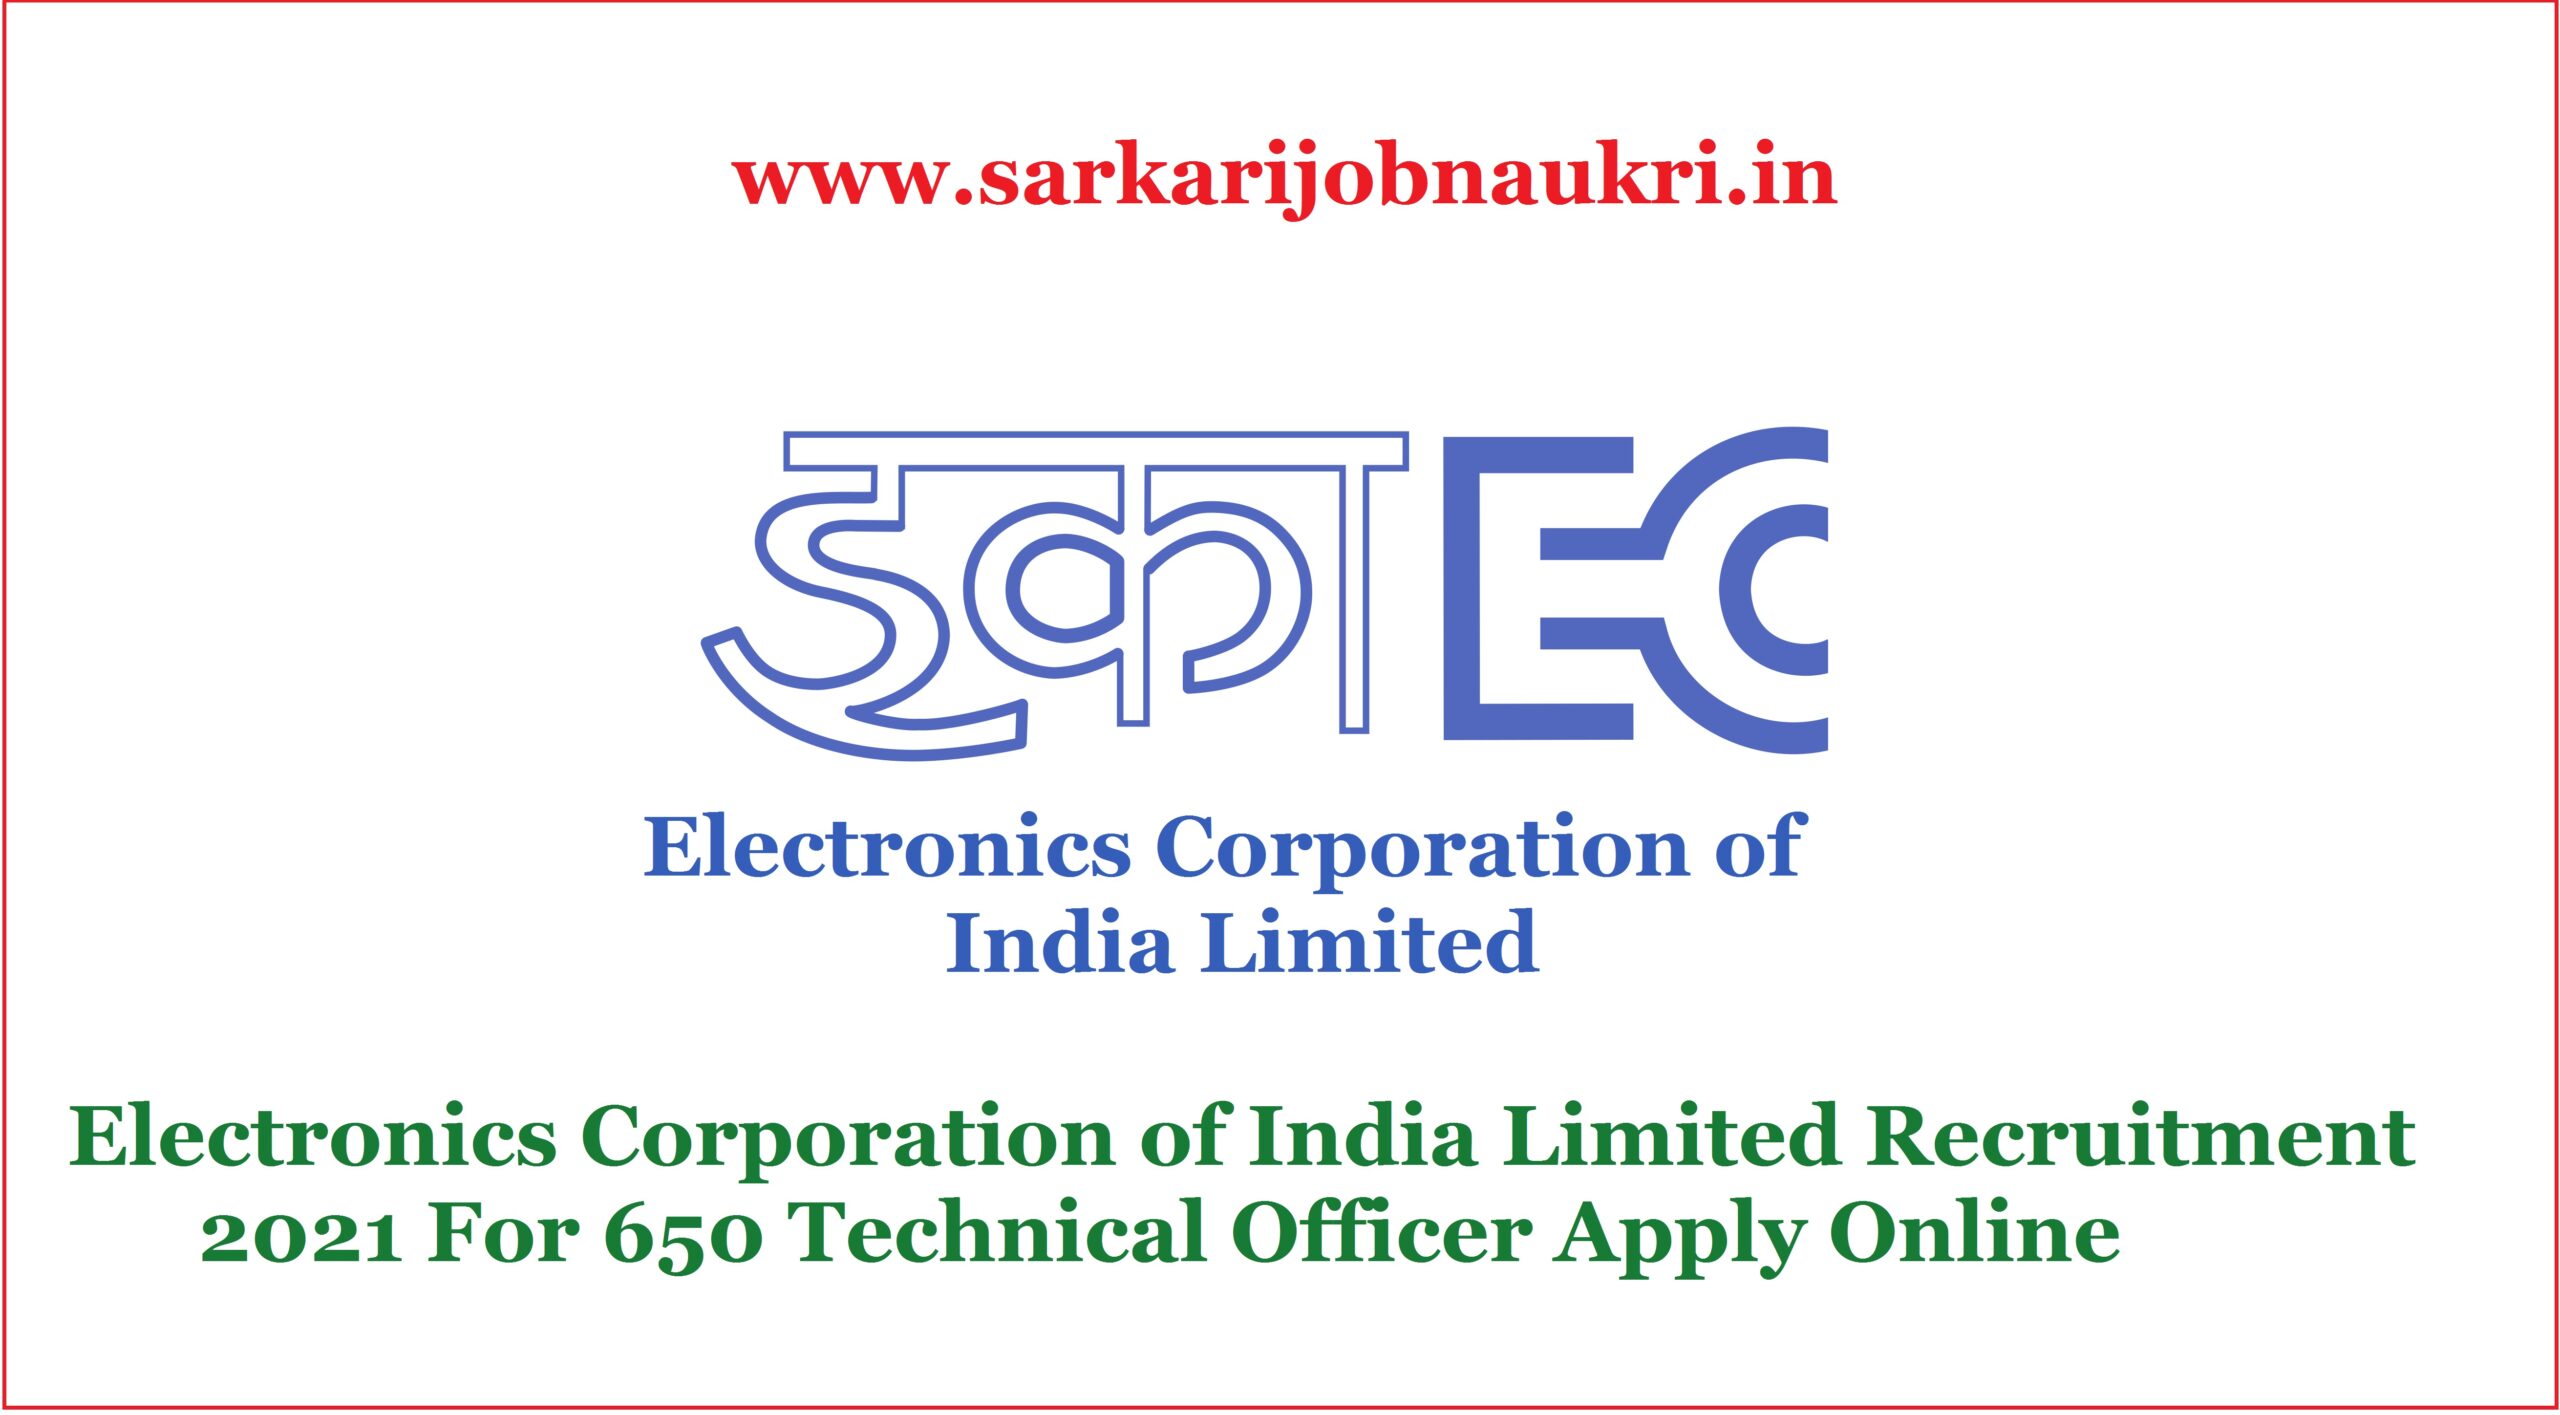 Electronics Corporation of India Limited Recruitment 2021 For 650 Technical Officer Apply Online